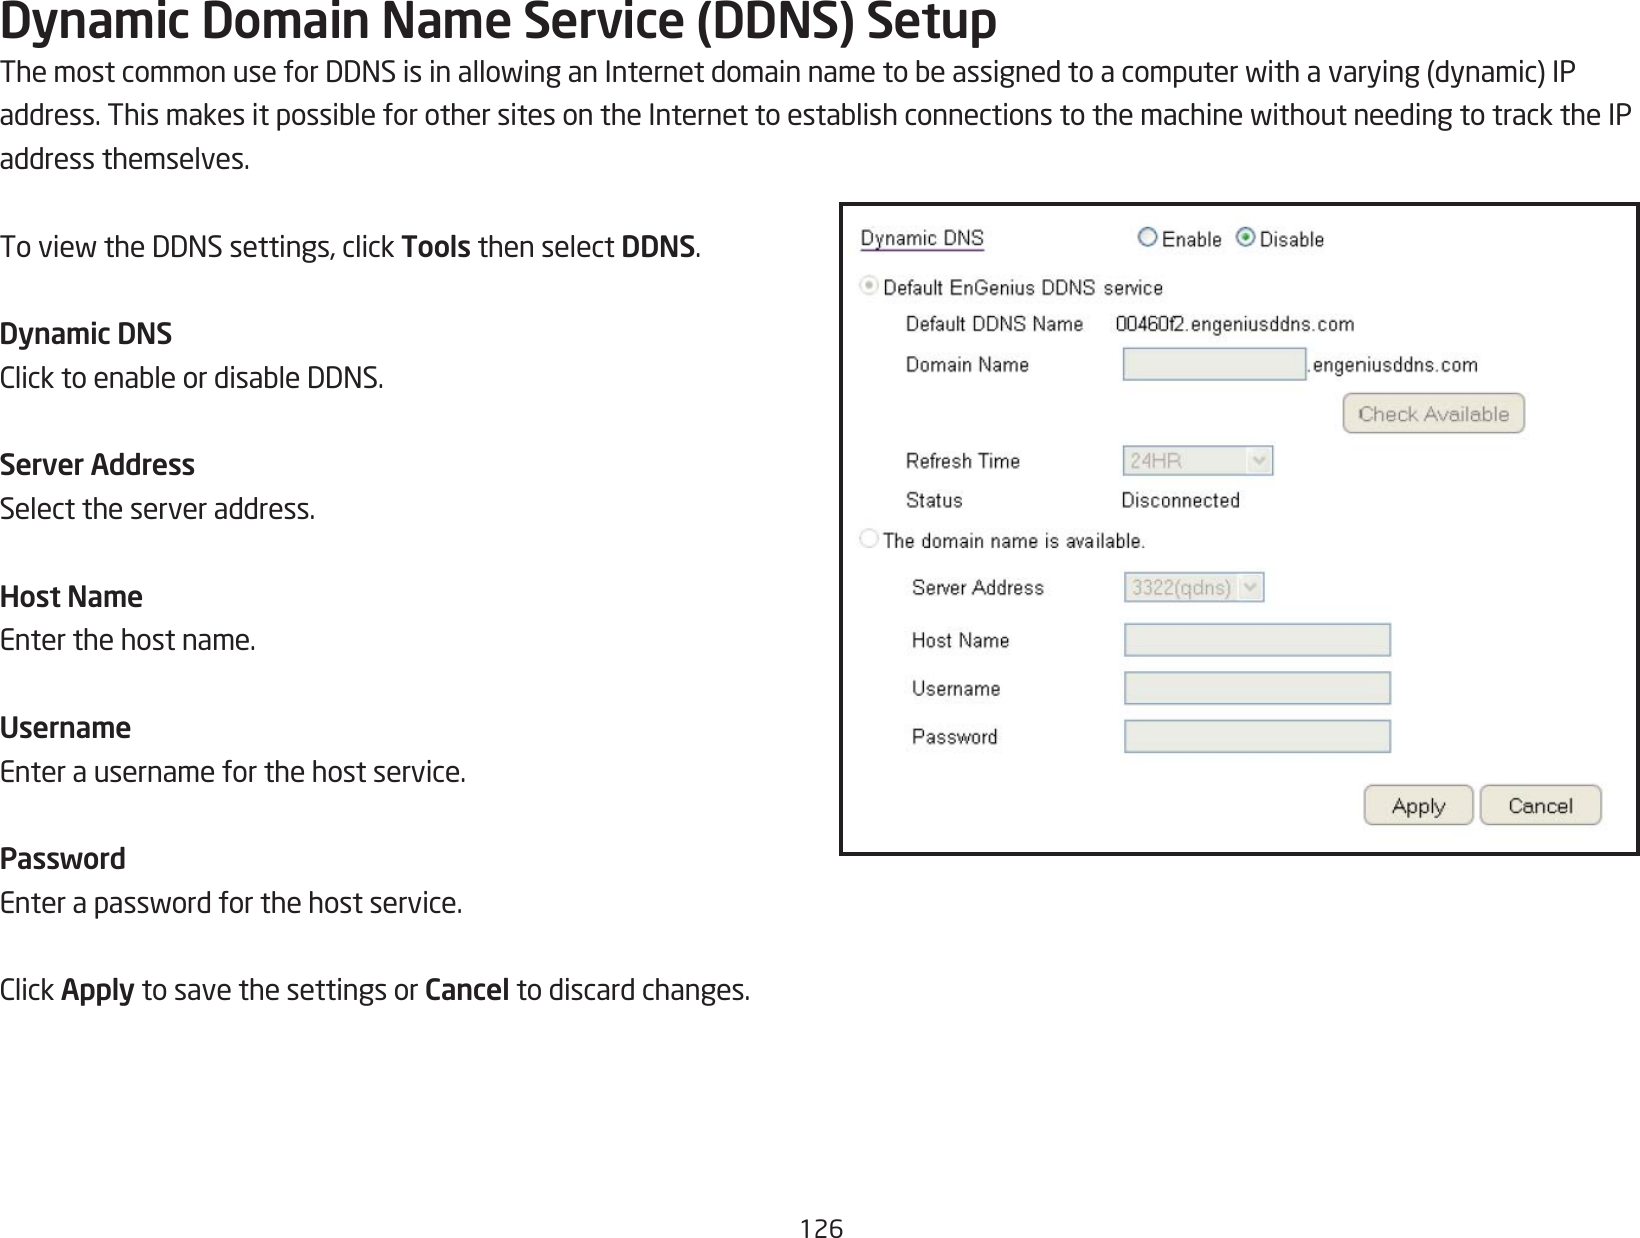 126Dynamic Domain Name Service (DDNS) SetupThemostcommonuseforDDNSisinallowinganInternetdomainnametobeassignedtoacomputerwithavarying(dynamic)IPaddress.ThismakesitpossibleforothersitesontheInternettoestablishconnectionstothemachinewithoutneedingtotracktheIPaddress themselves.ToviewtheDDNSsettings,clickTools then select DDNS.Dynamic DNSClicktoenableordisableDDNS.Server AddressSelect the server address.Host NameEnter the host name.UsernameEnter a username for the host service.PasswordEnterapasswordforthehostservice.ClickApply to save the settings or Cancel to discard changes.